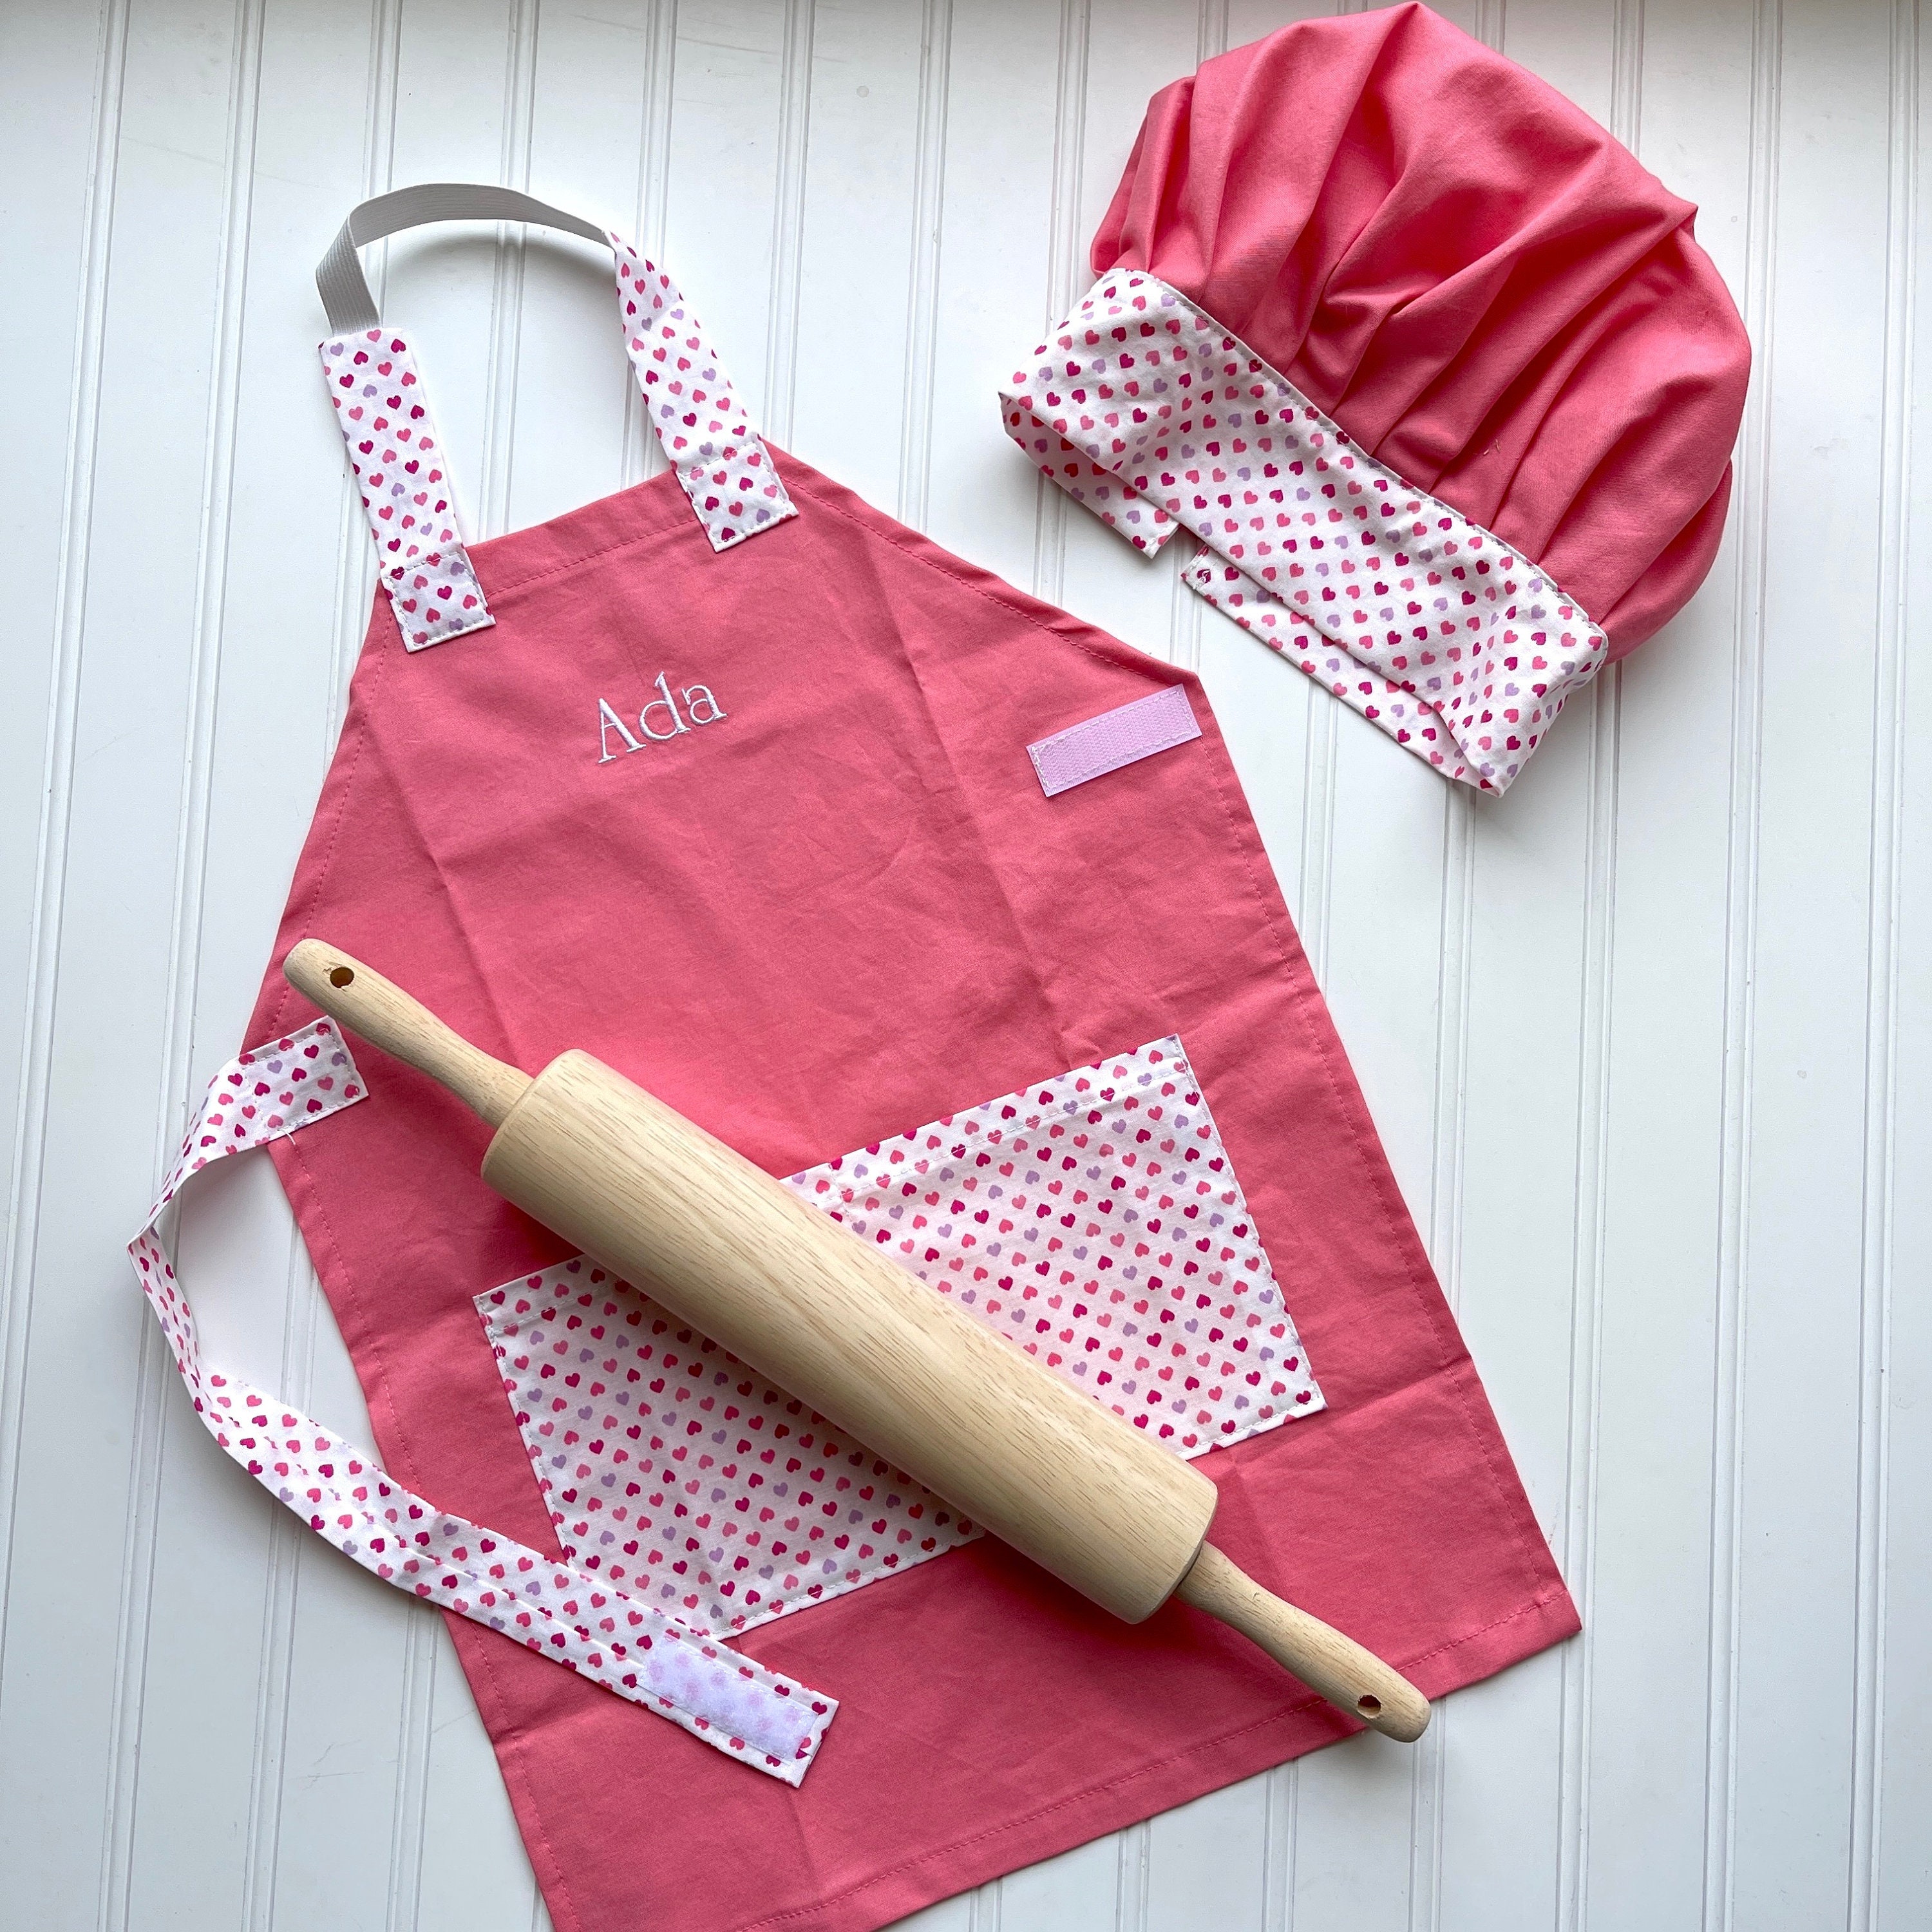 Girls Pink Personalized Apron, Personalized Kids Apron. Chef Hat and Apron  Set, Toddler Apron, Apron for Kids, Custom Kids Apron 